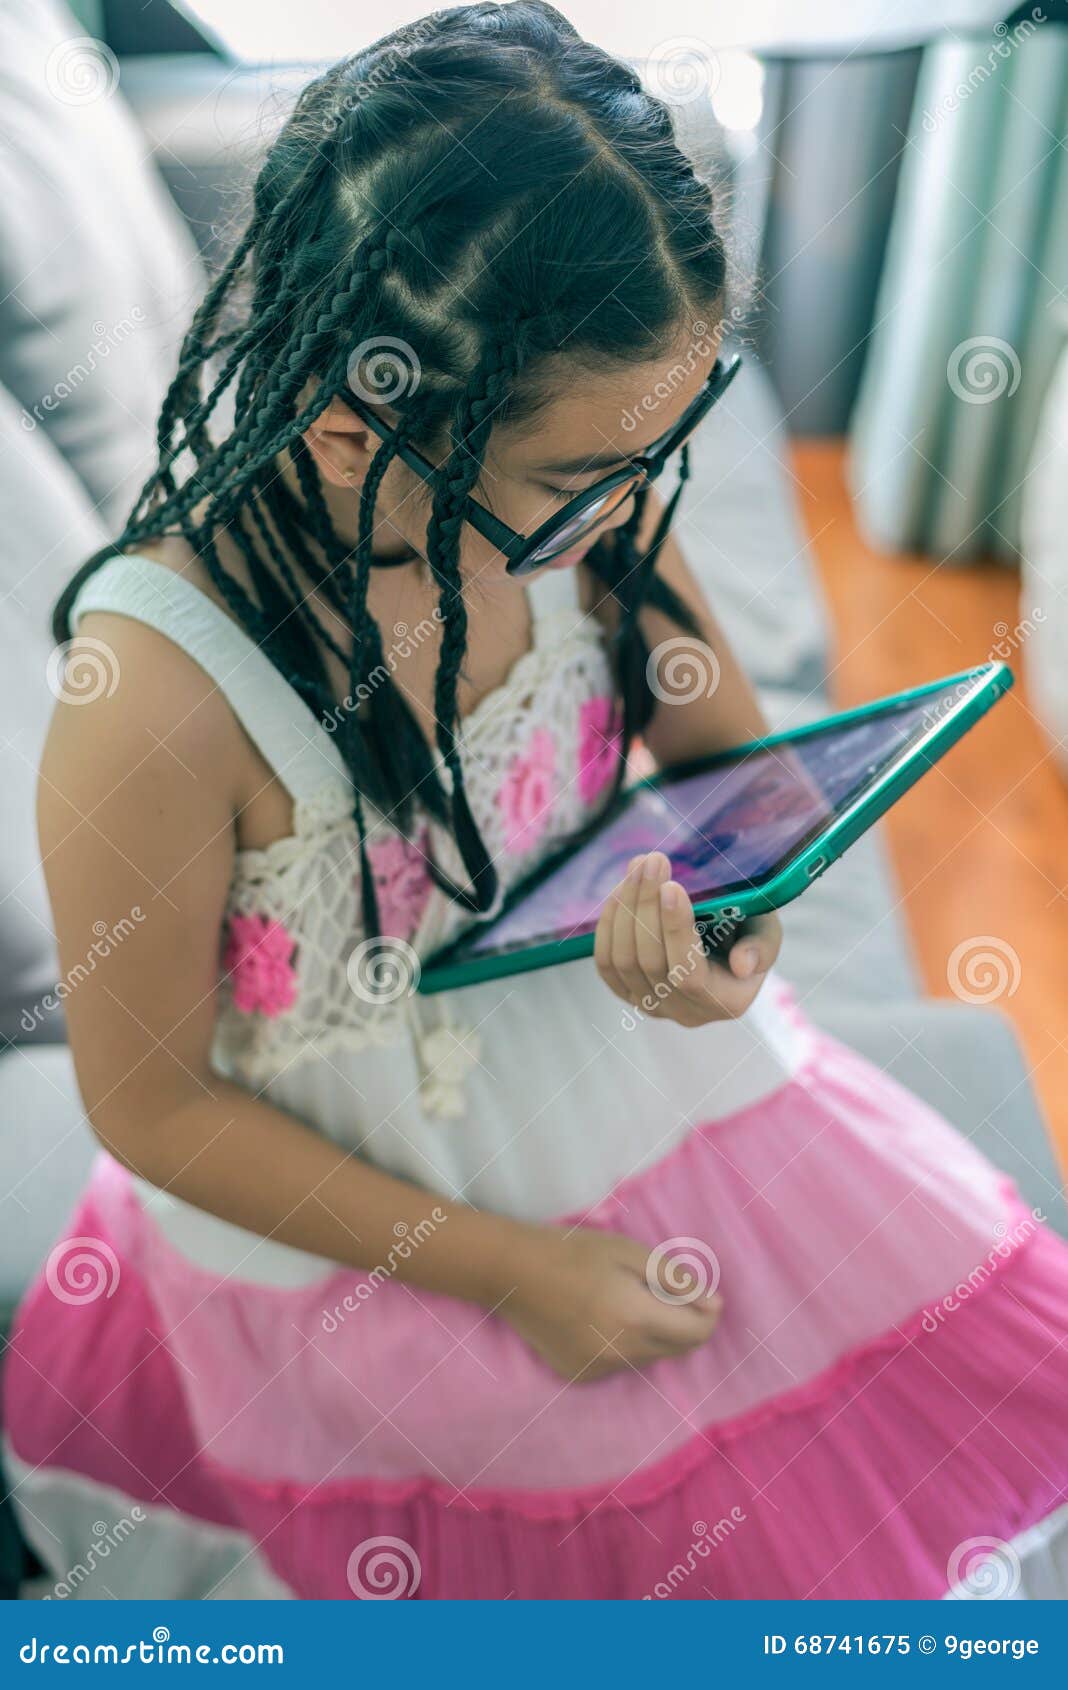 Cute Little Girl Playing With Computer At Home Laying On